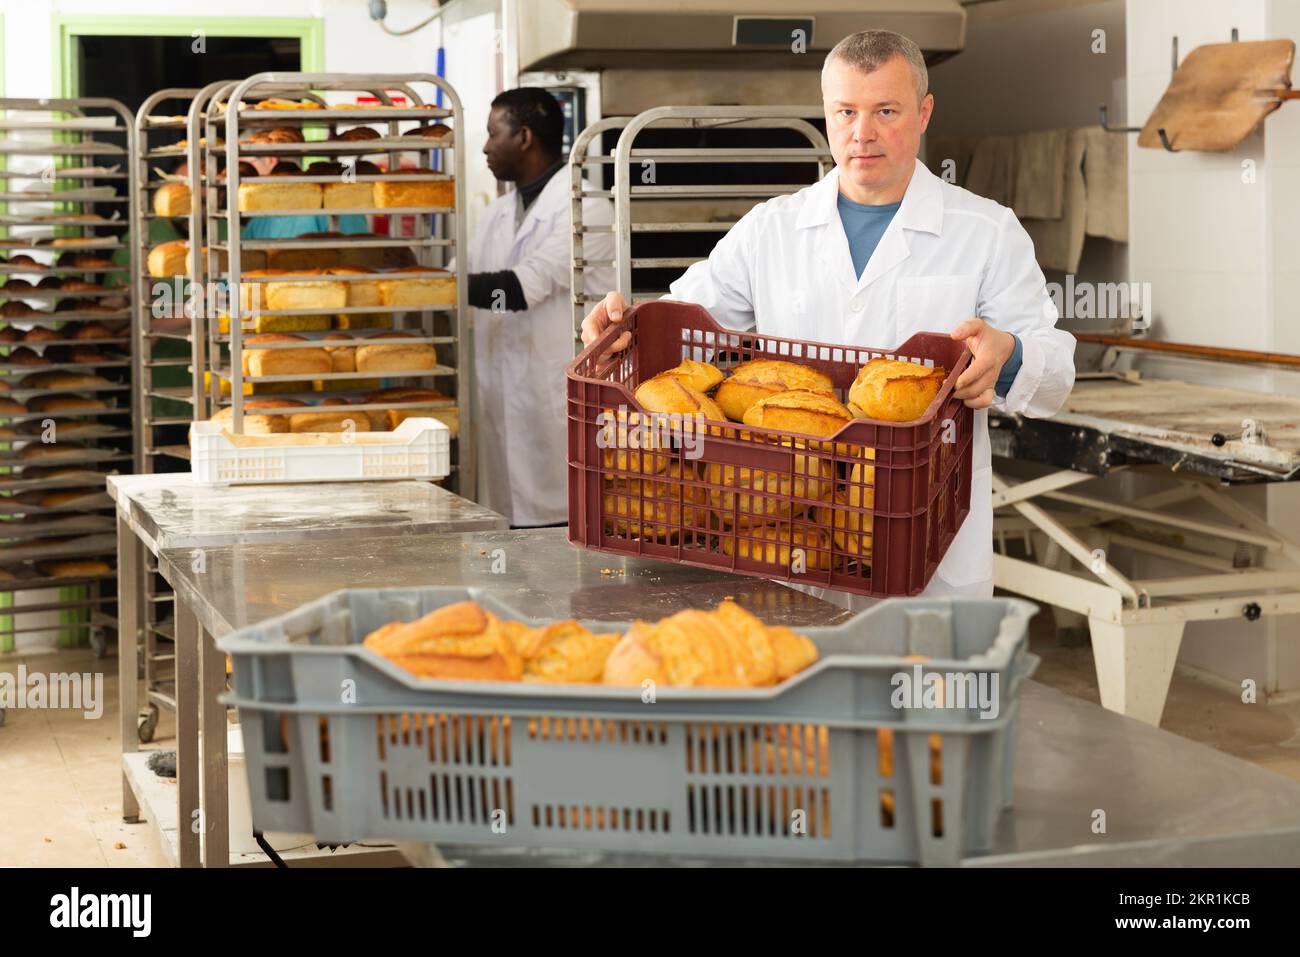 Two bakers arranging baked bread in bakery Stock Photo